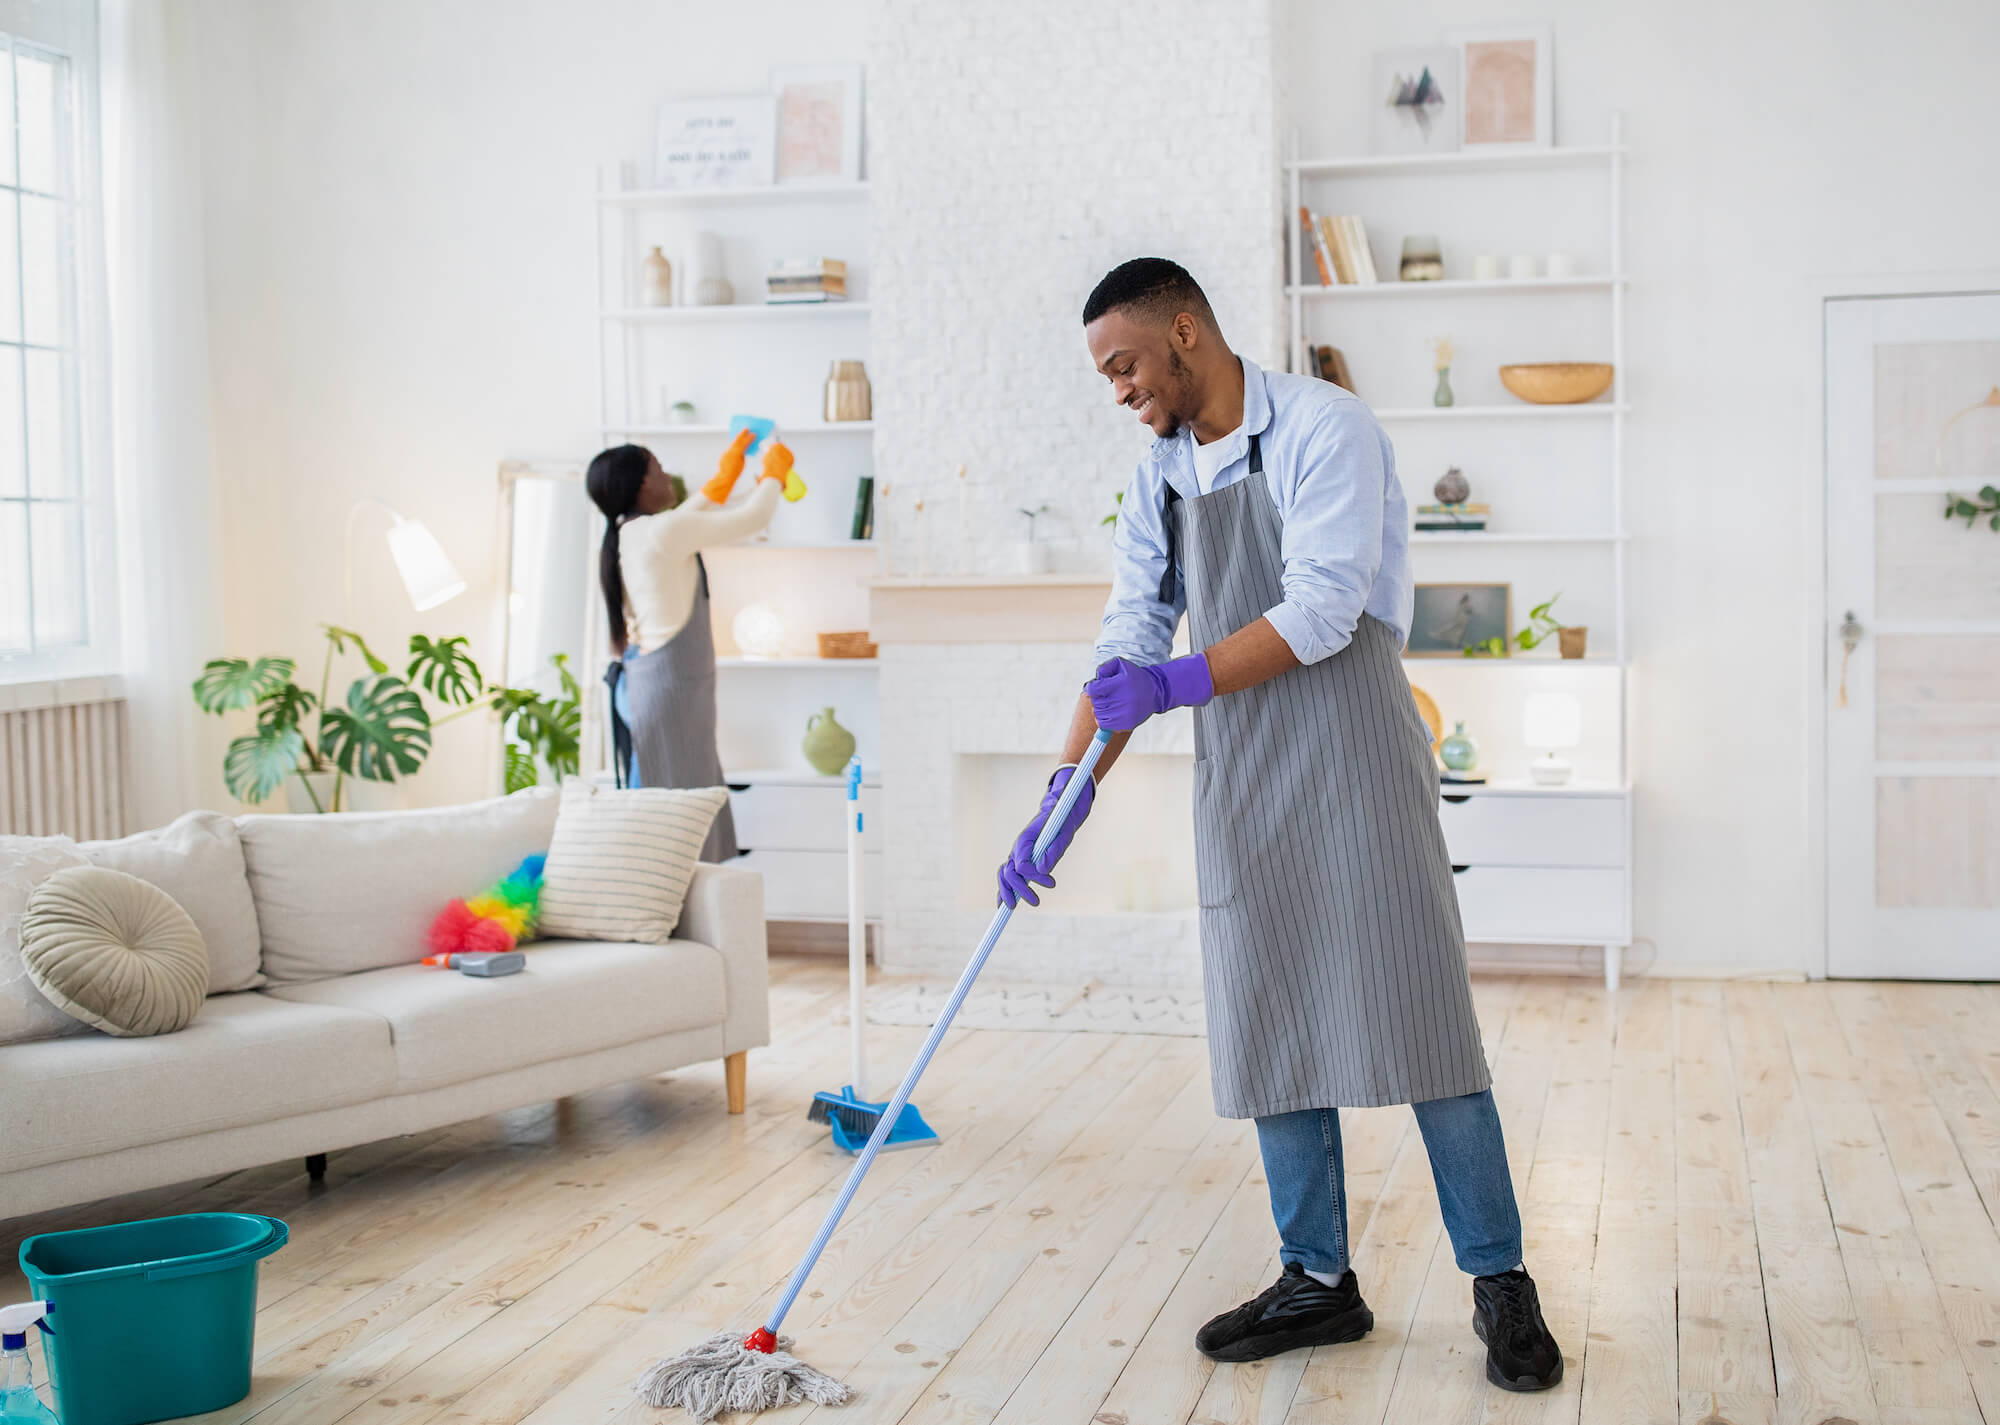 Local Independent Housekeepers Cleaning Convenience Near Me